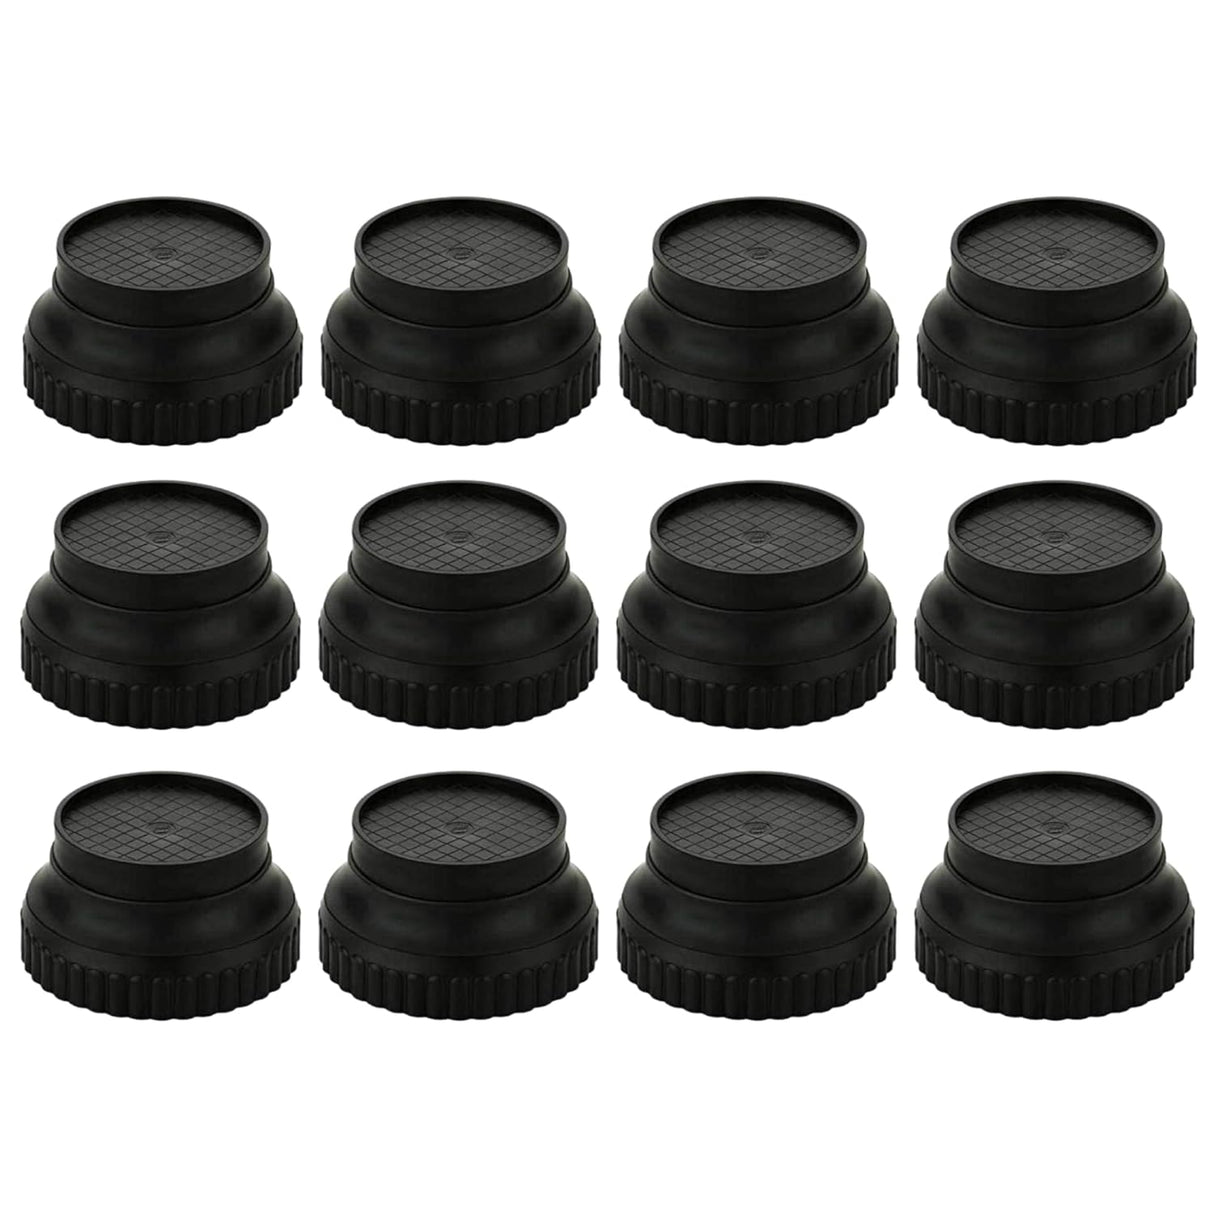 Plastic Round Base Stand 12 Pcs for Bed, Refrigerator Stand, Washing Machine Stand, Furniture Base Stand and Fridge Stand for Single Door and Double Door (Black Round)